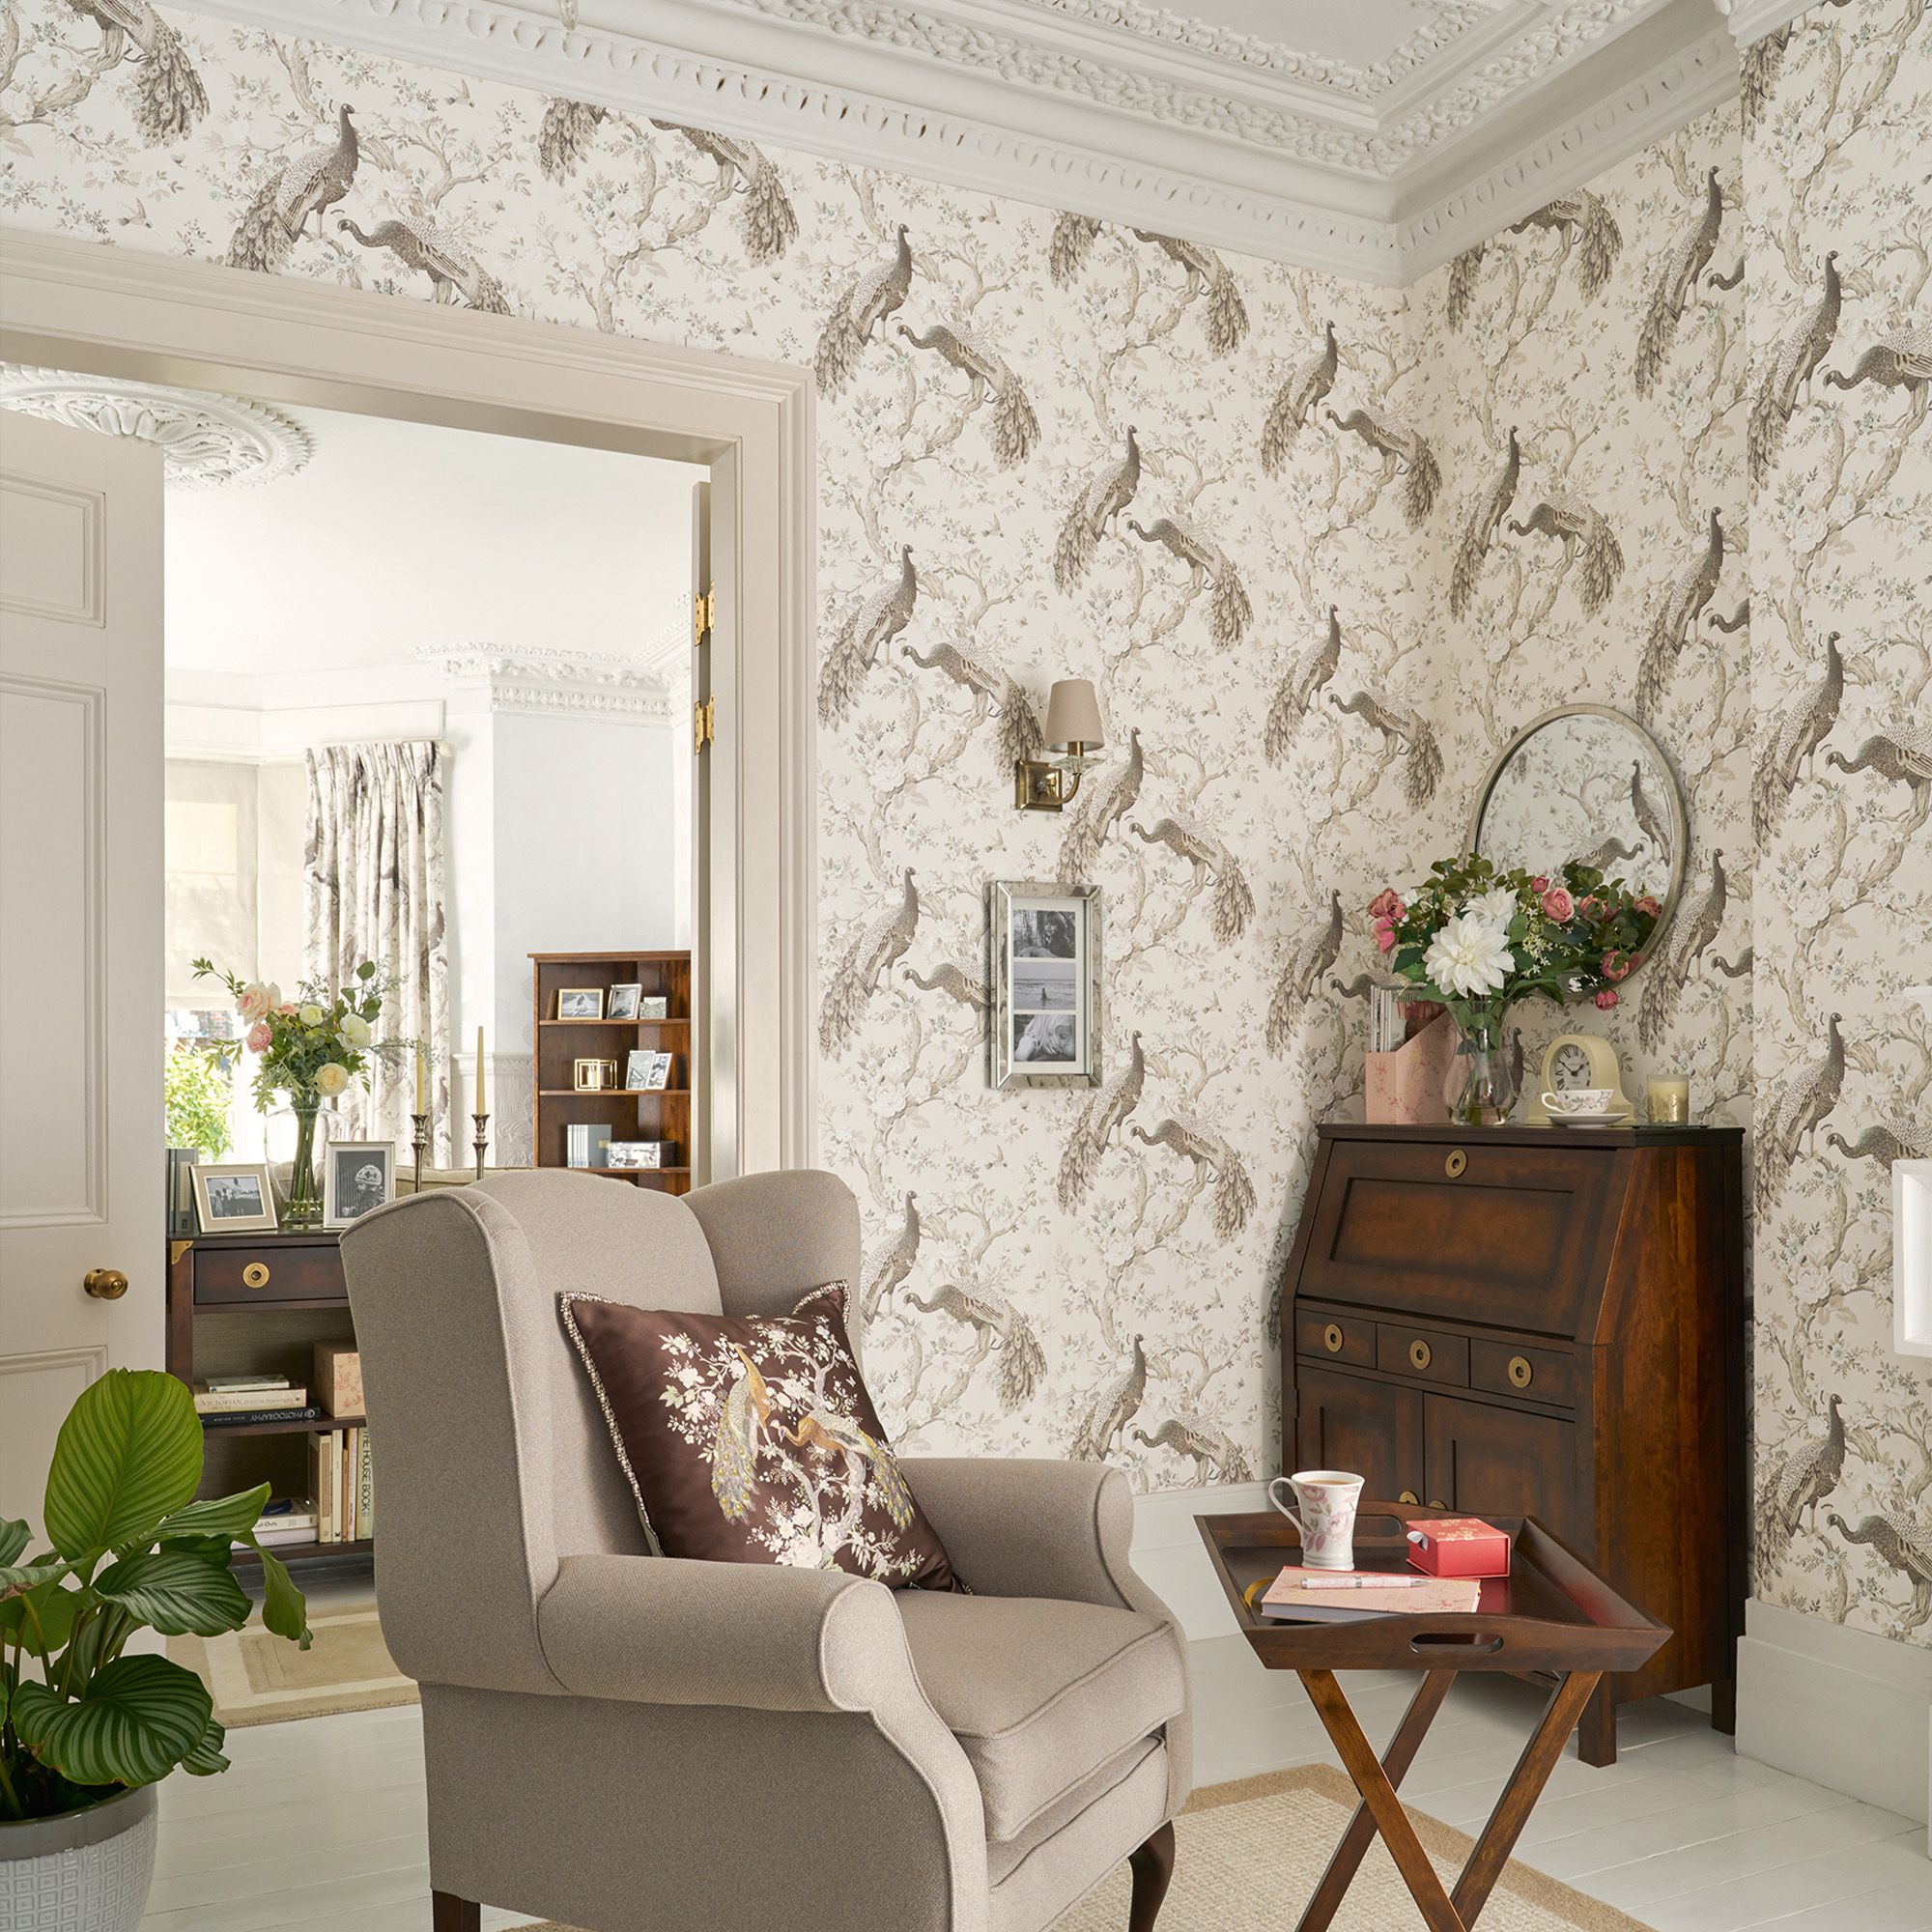 Laura Ashley Belvedere Soft truffle Peacock Smooth Wallpaper